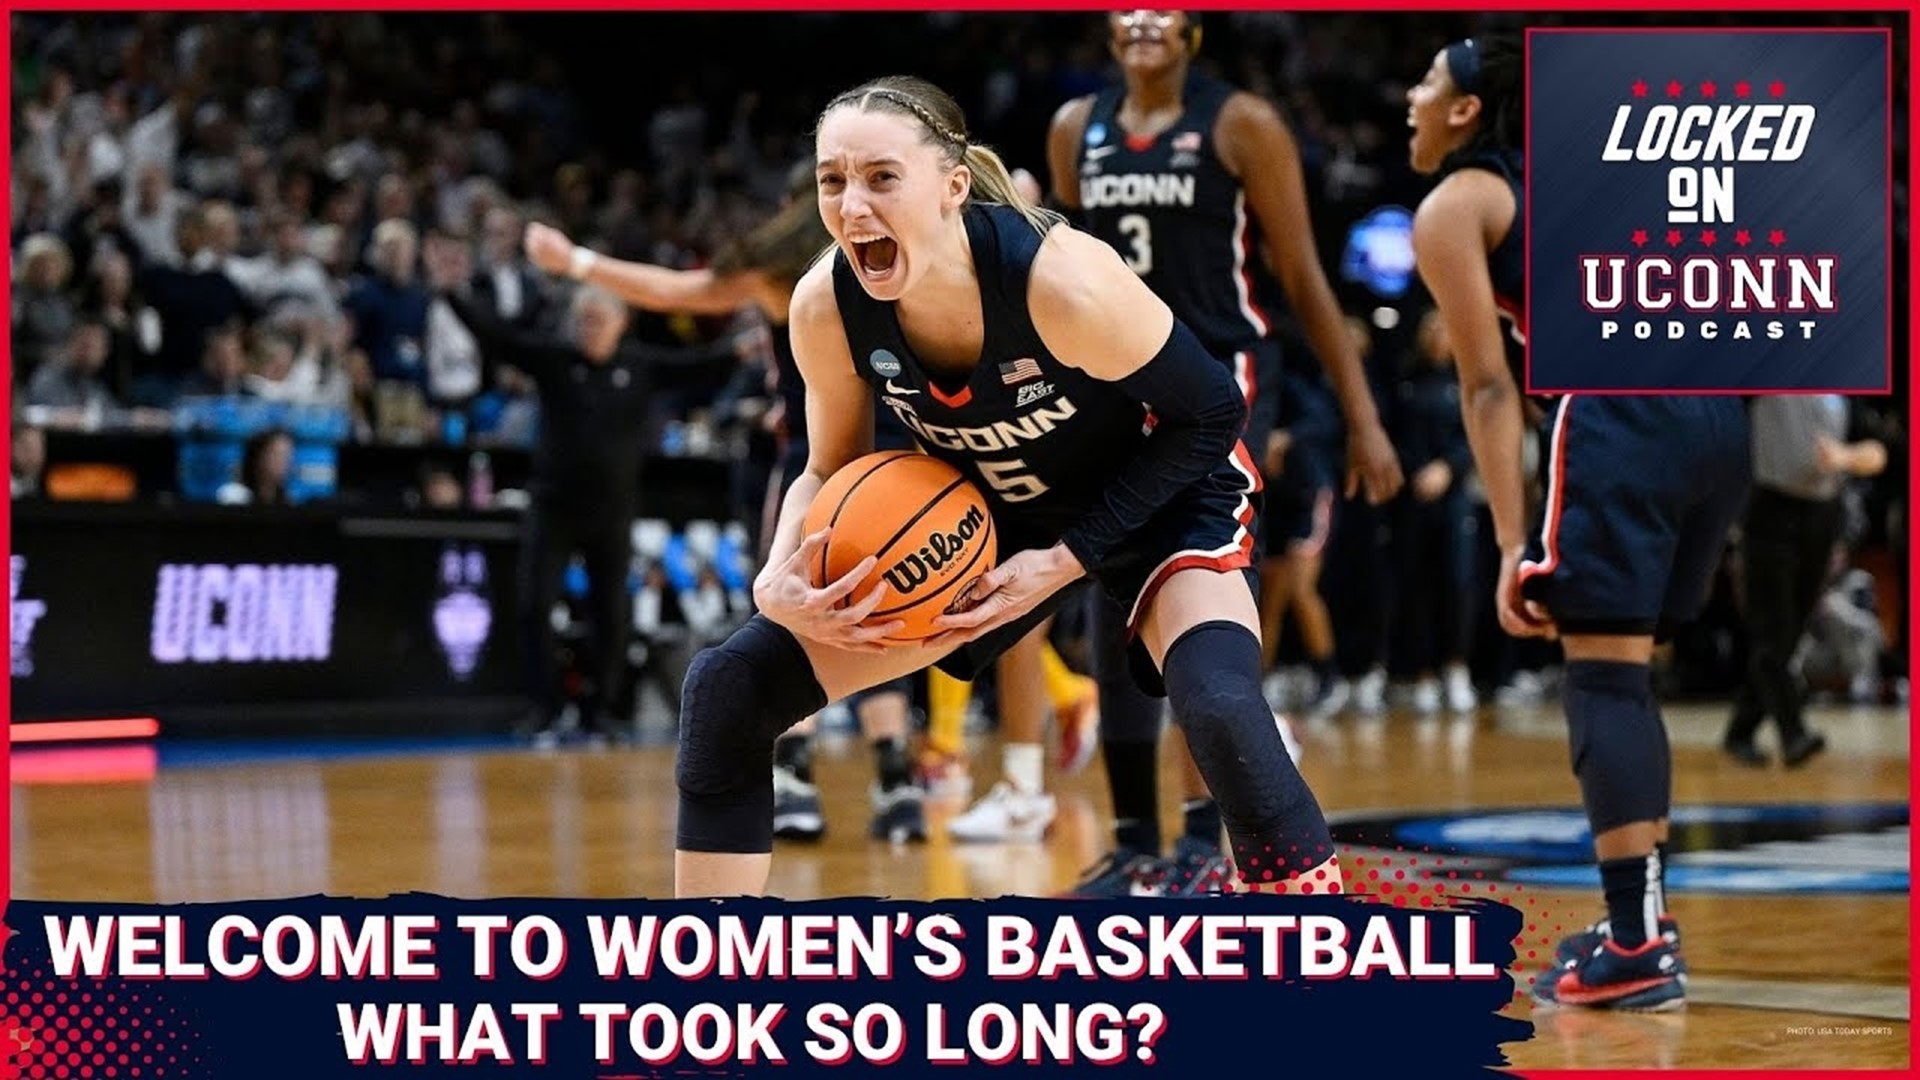 In this episode of Locked On UConn, host Mark Zanetto reflects on the long-standing dominance of the UConn women's basketball program.